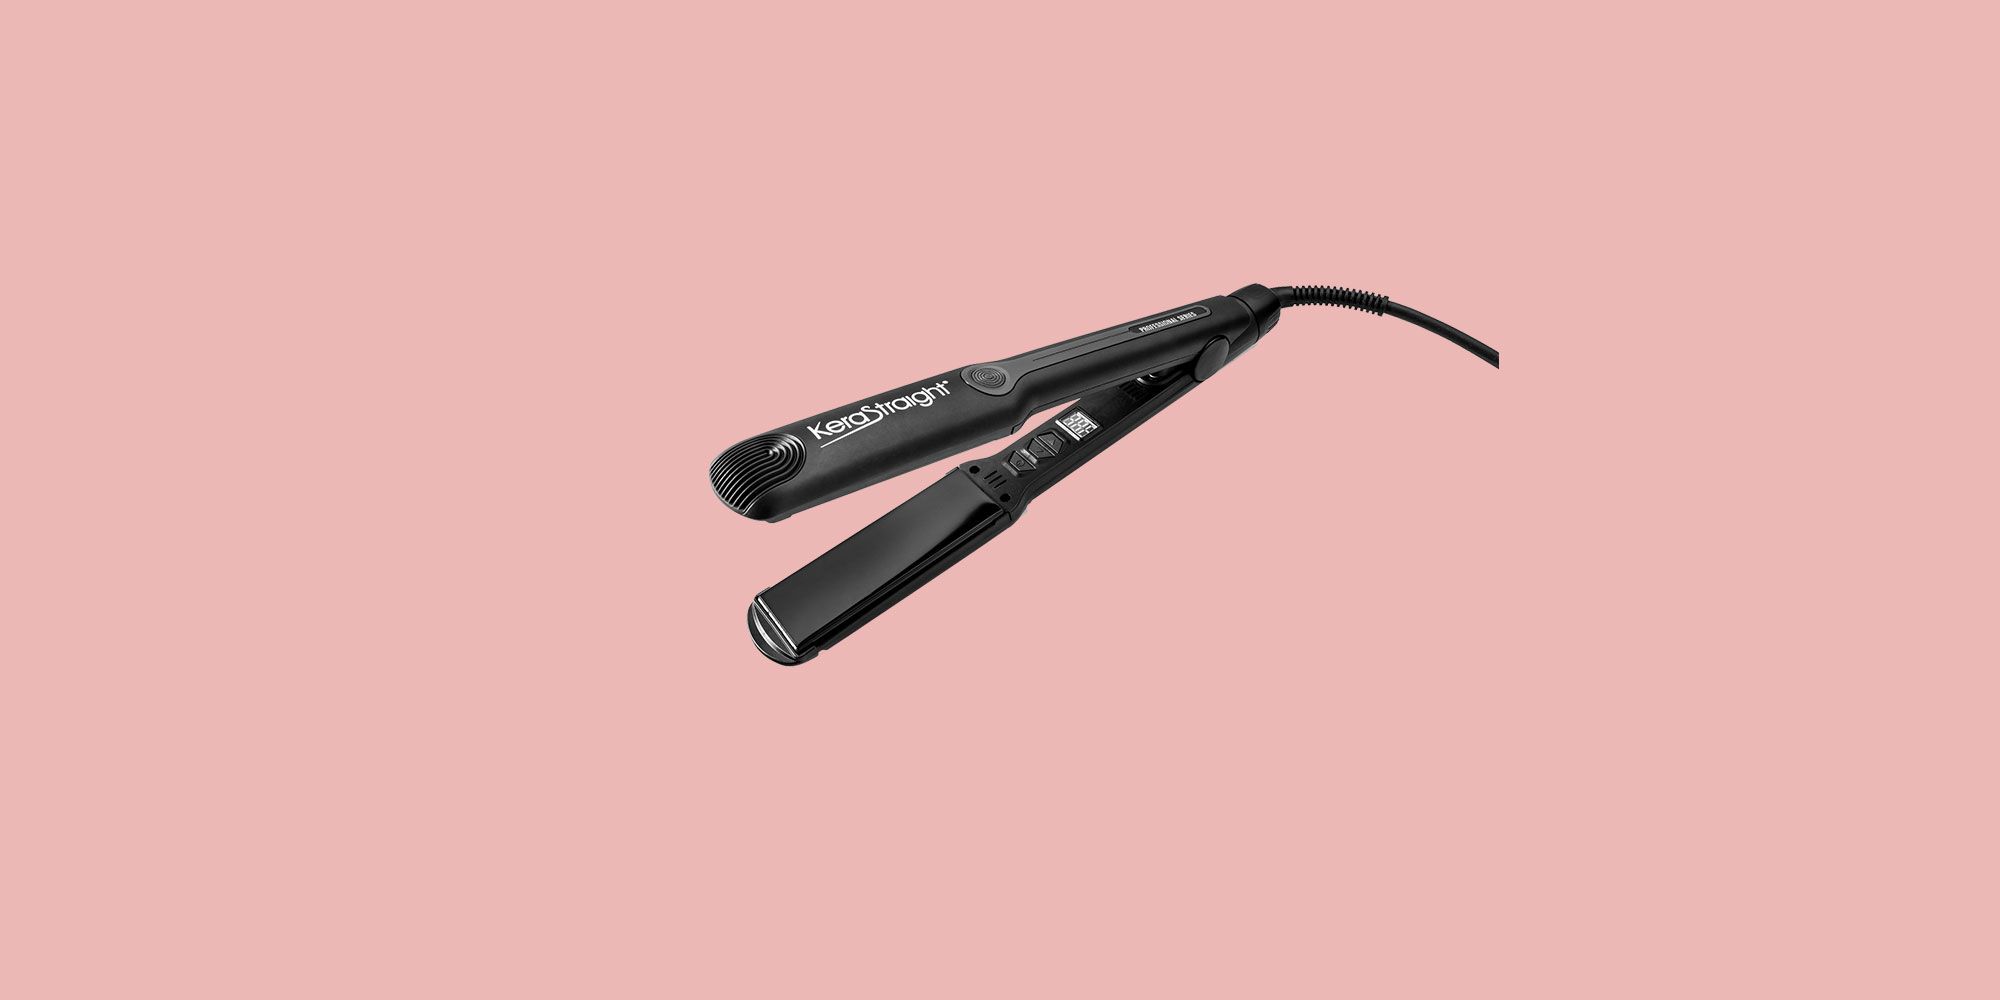 Remington PROLuxe Straightener Review